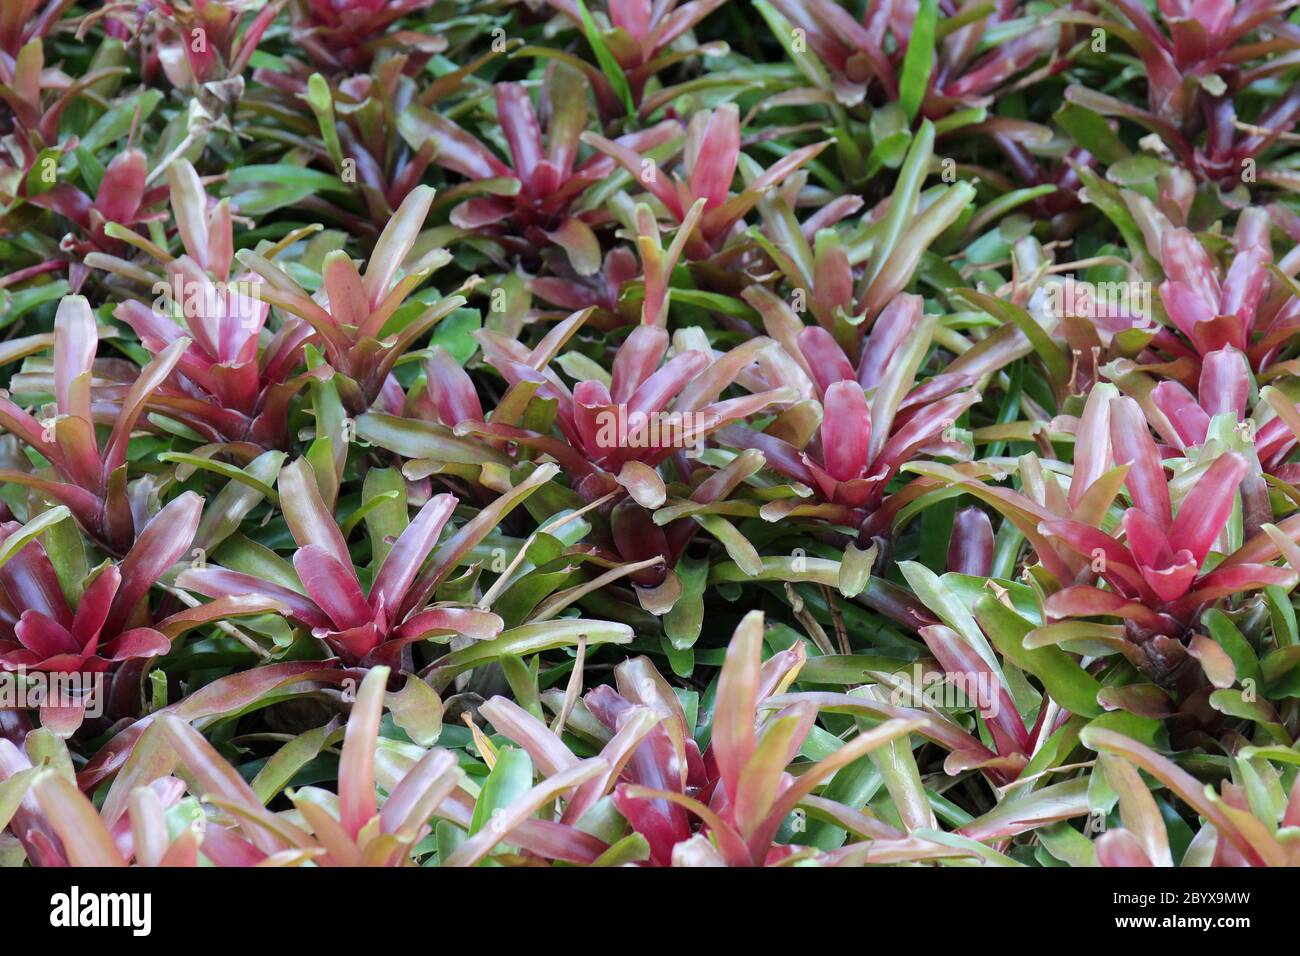 A group of Neoregelia Fireball Bromeliad plants with red and green leaves growing in a garden Stock Photo